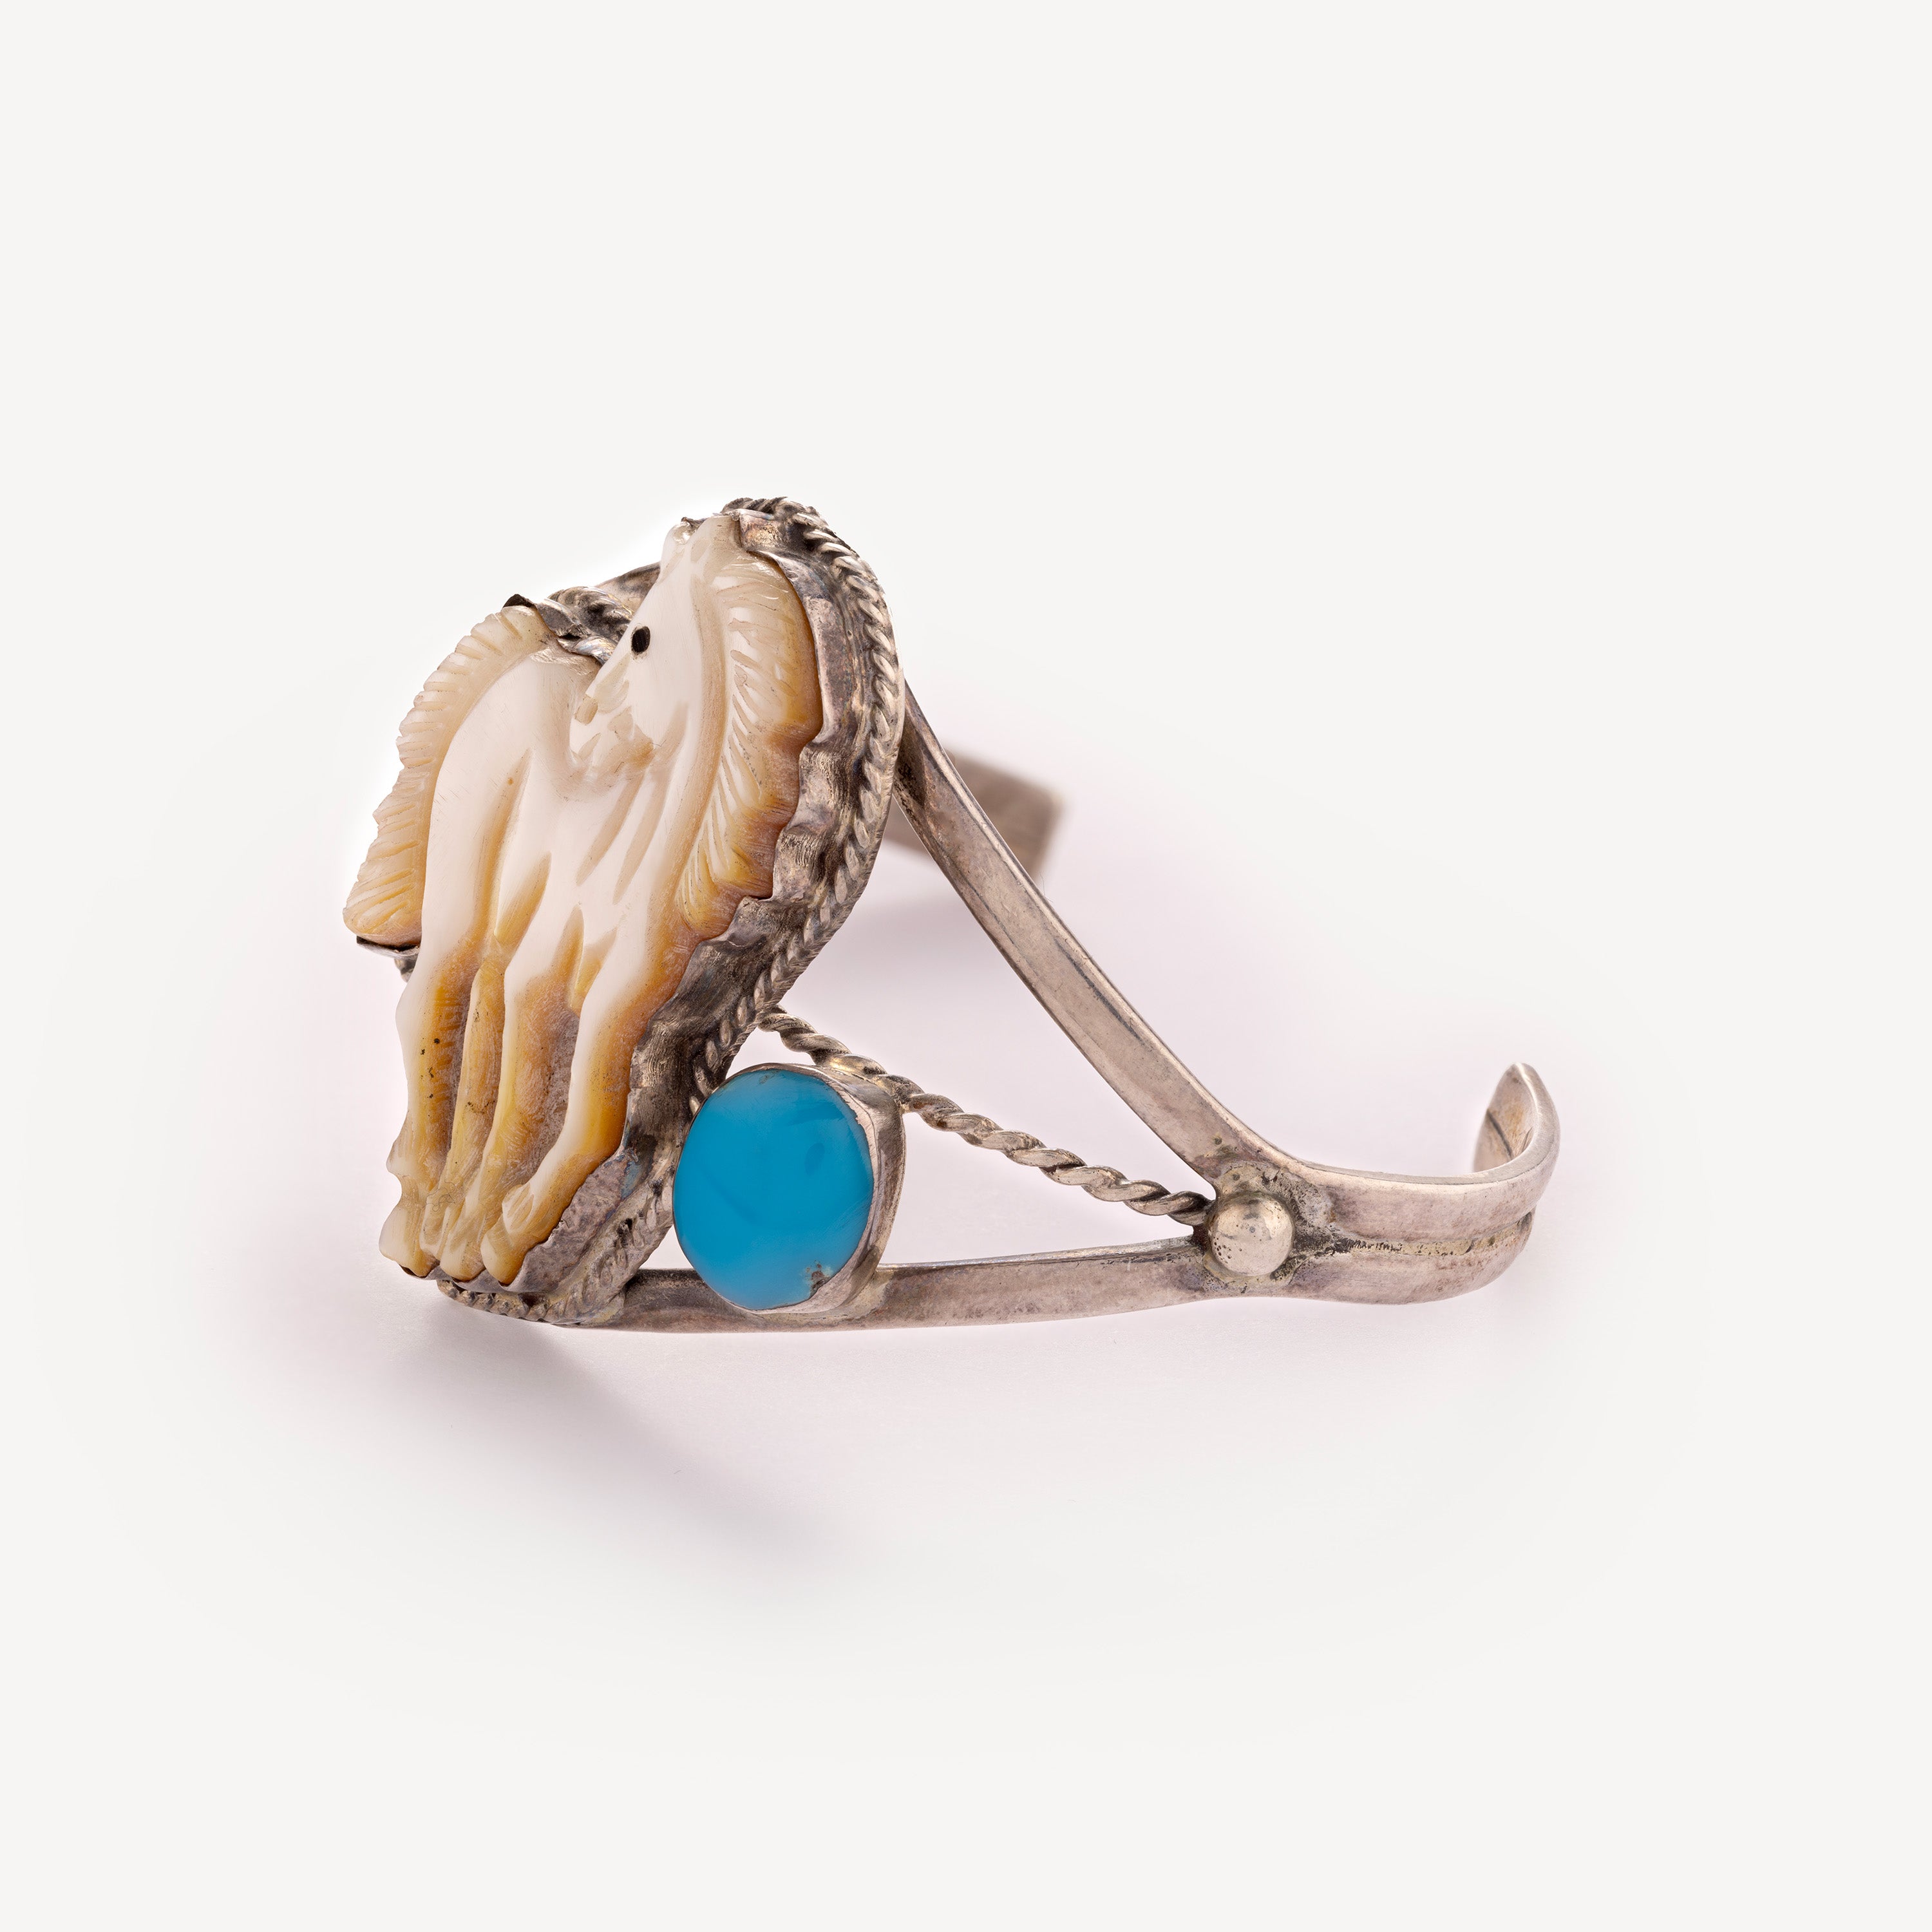 Mother-of-pearl and turquoise horse bangle bracelet